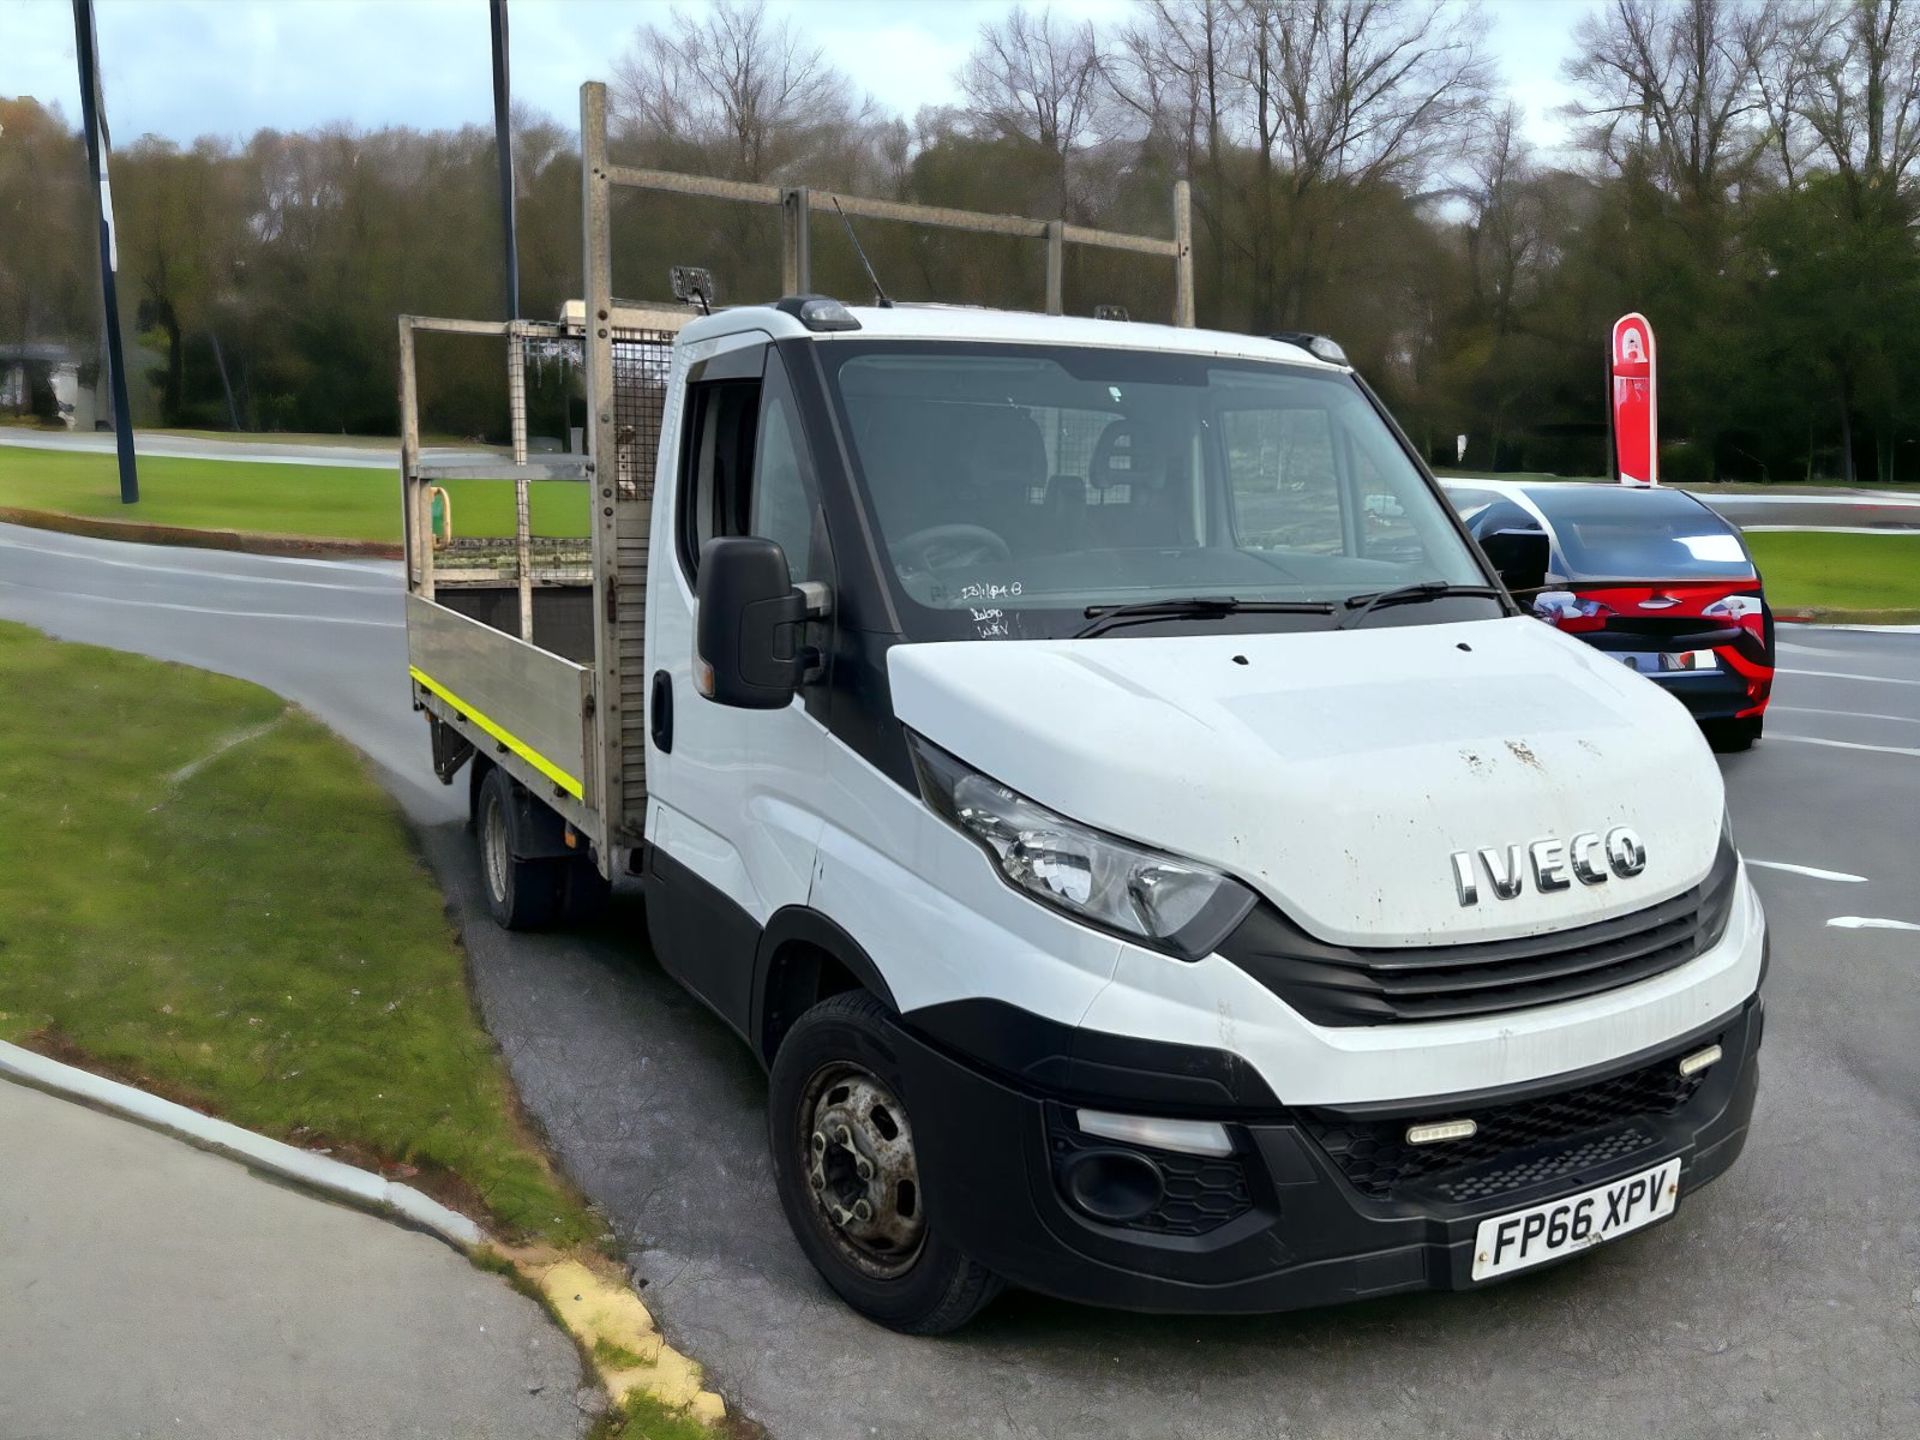 2016-66 REG IVECO DAILY DROP SIDE 35C13 - HPI CLEAR - READY TO GO! - Image 2 of 10